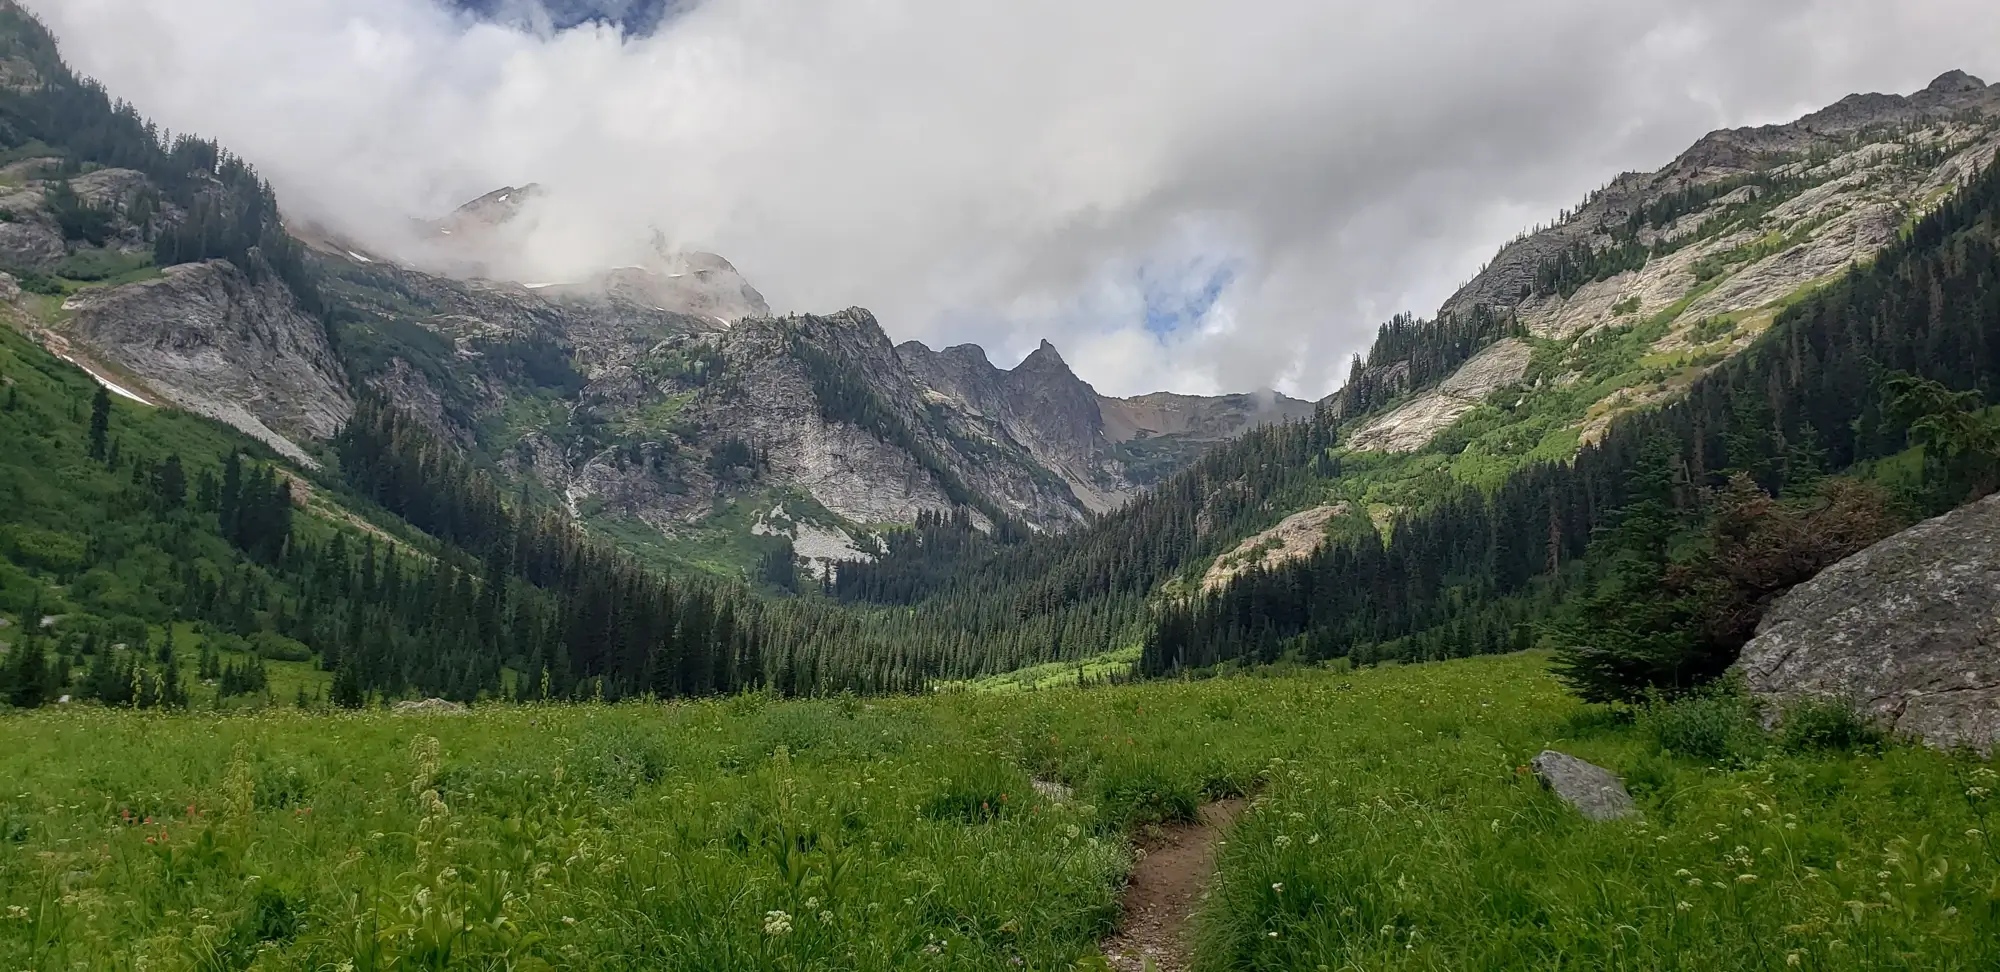 Spider meadows and phelps creek